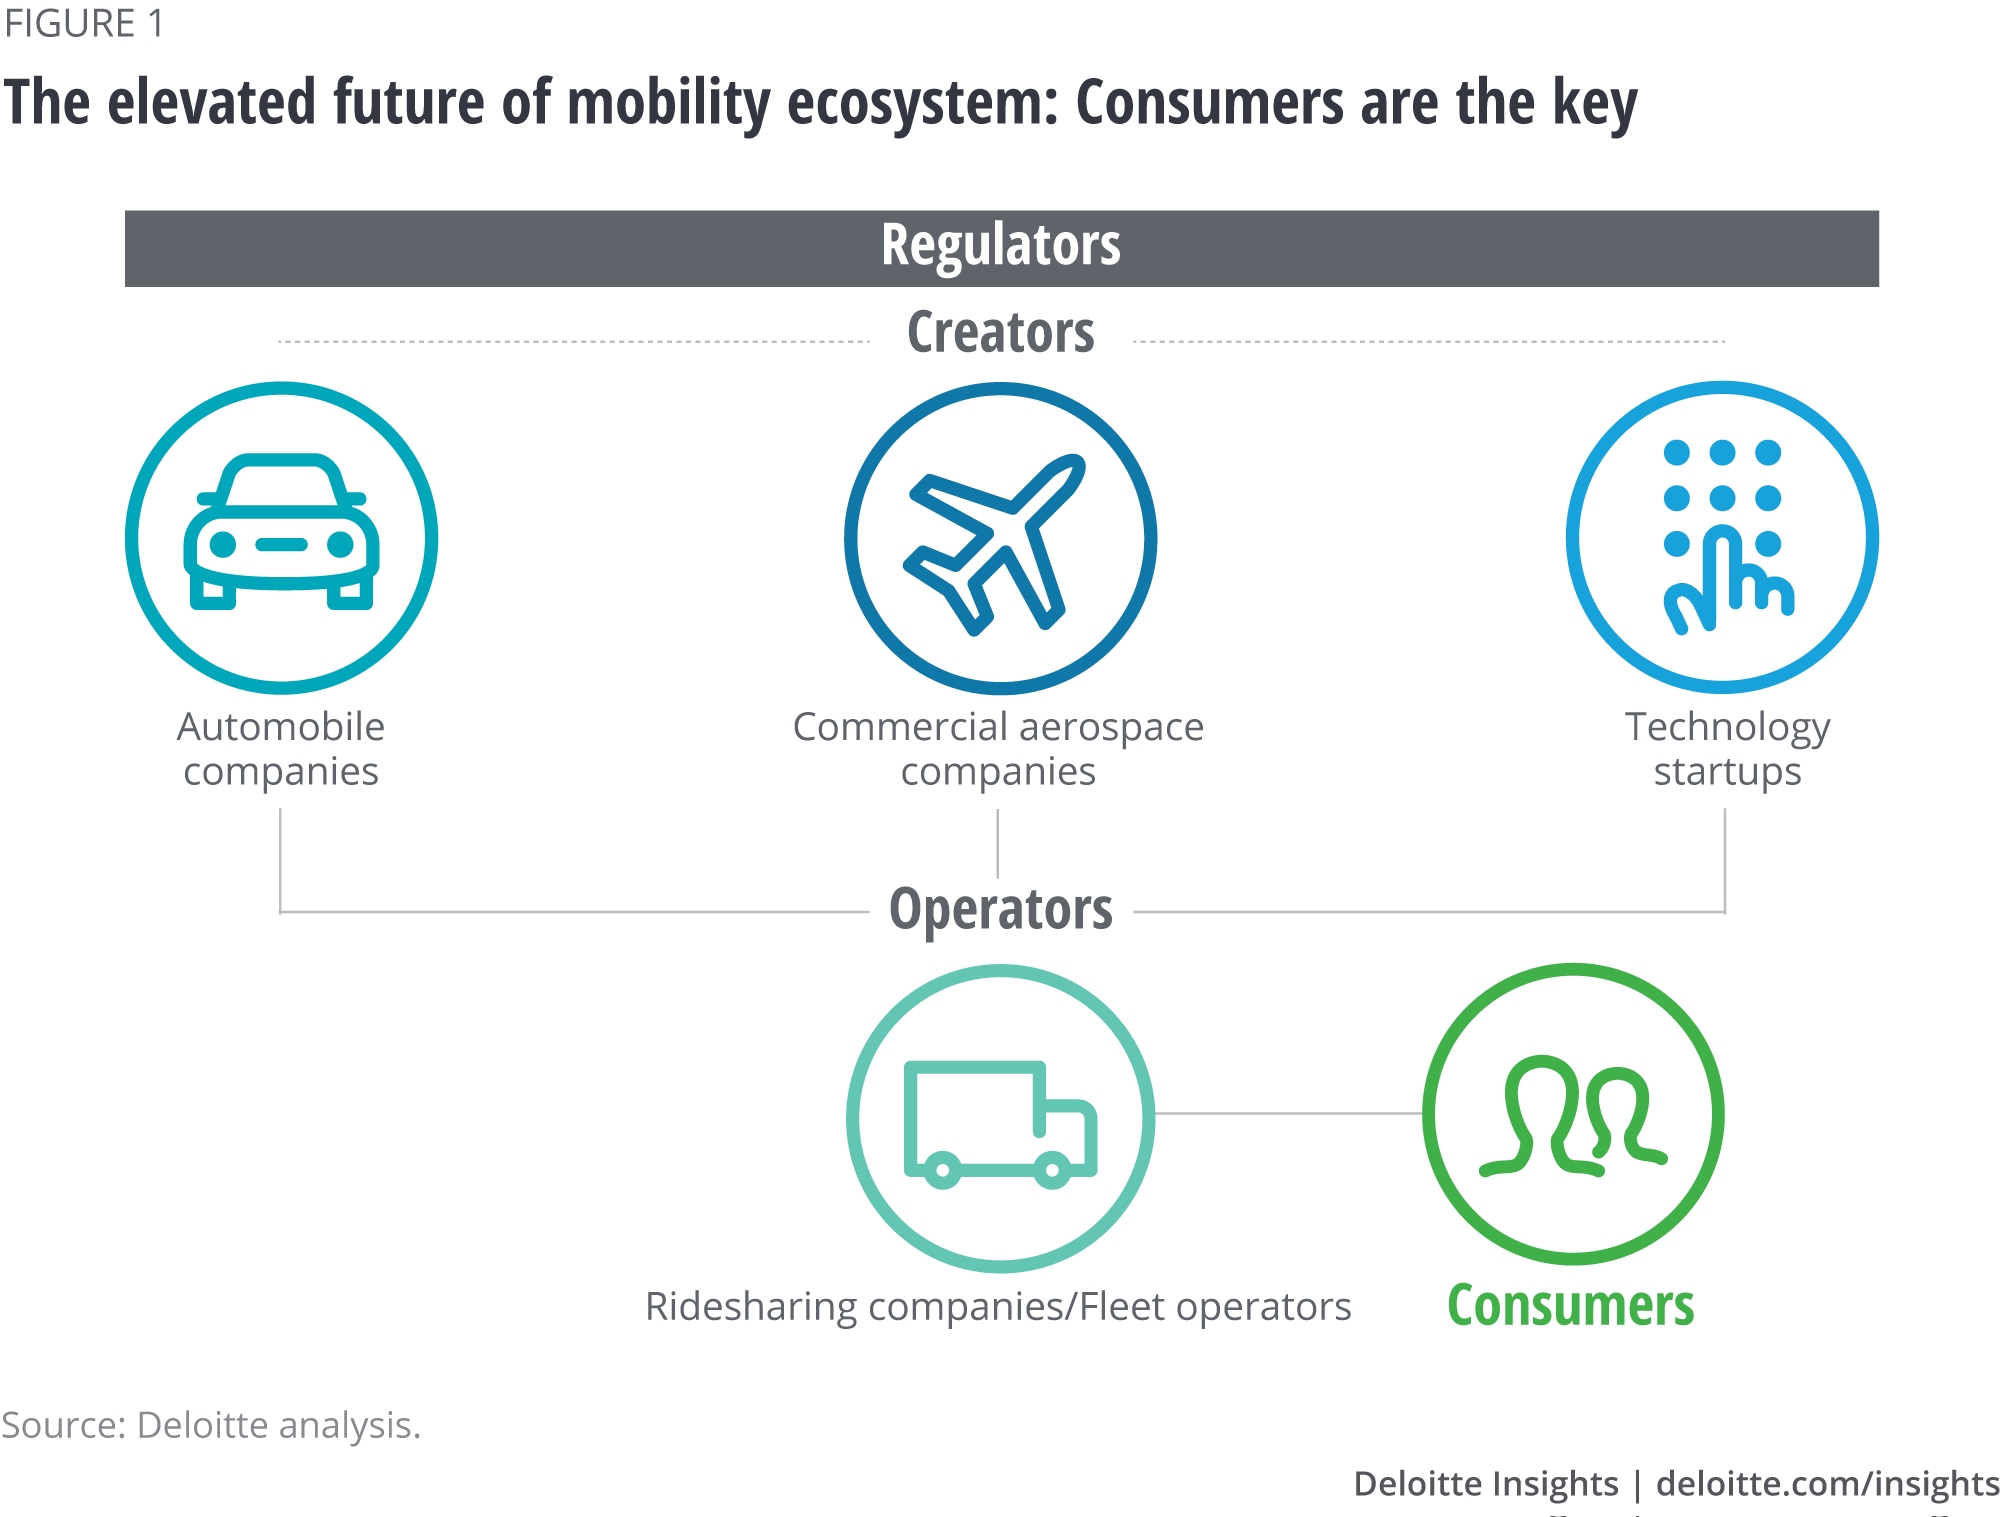 The elevated future of mobility ecosystem: Consumers are the key